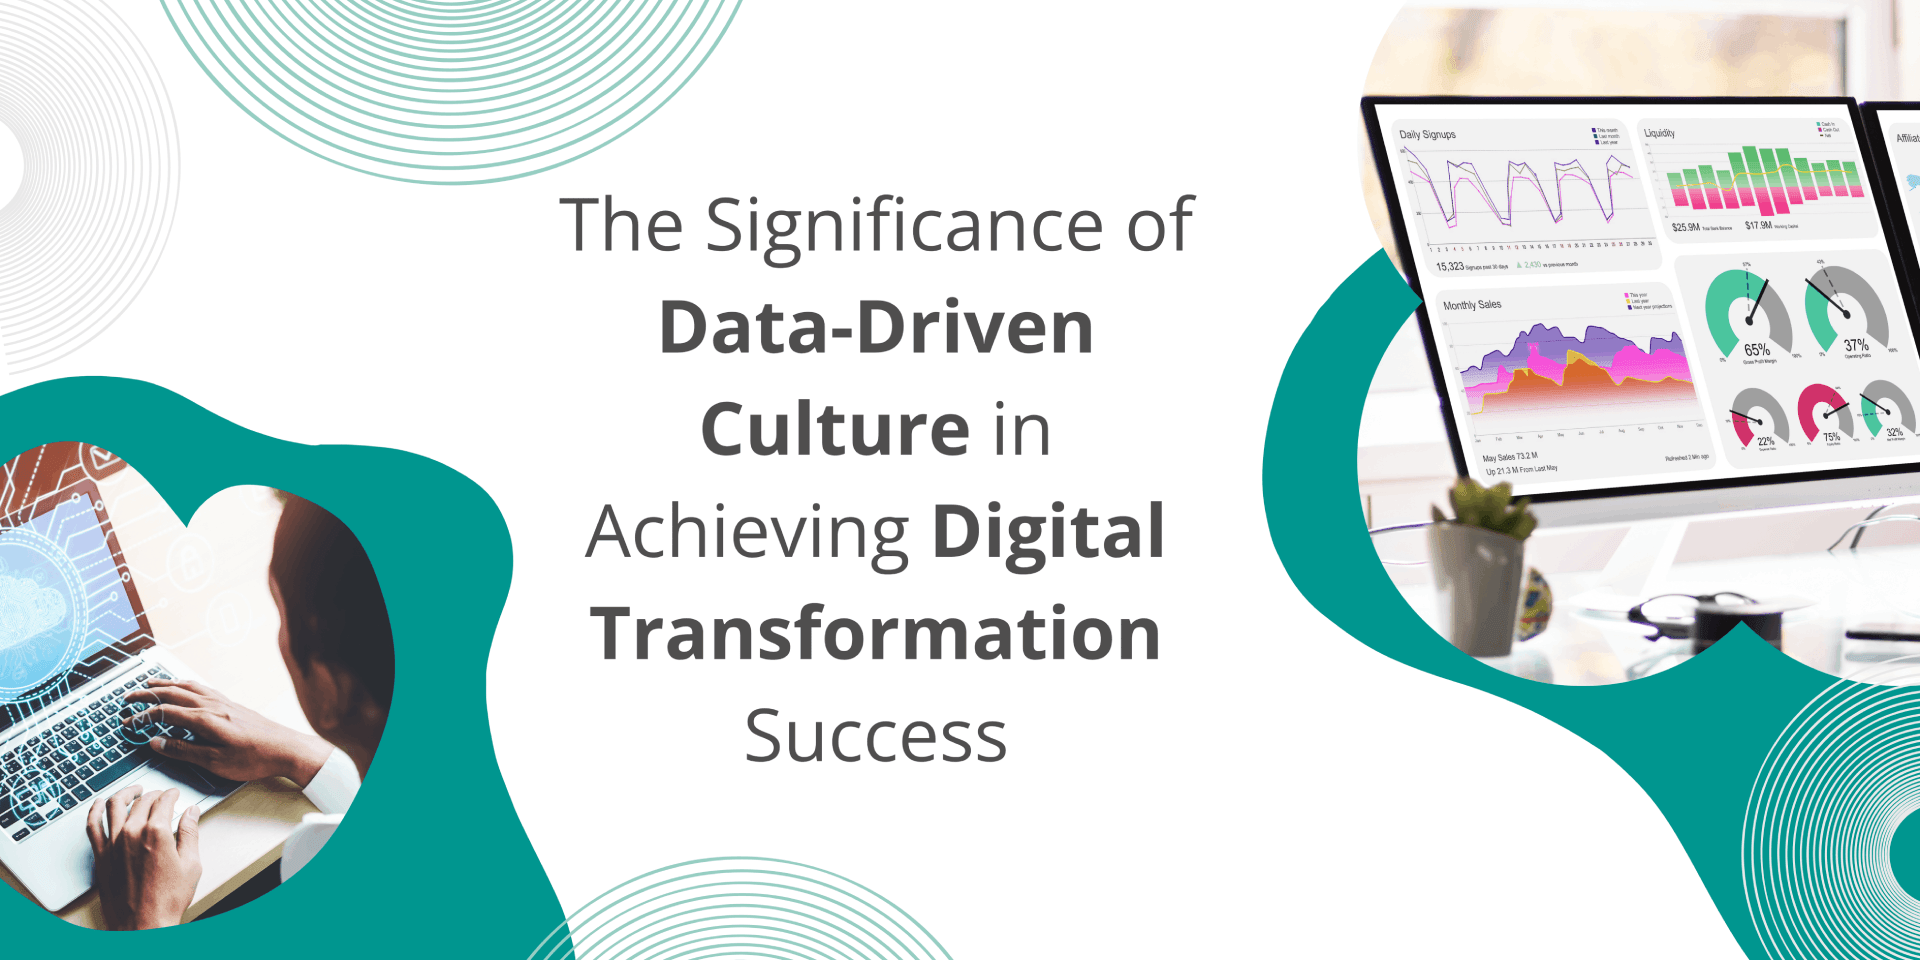 The Significance of Data-Driven Culture in Achieving Digital Transformation Success